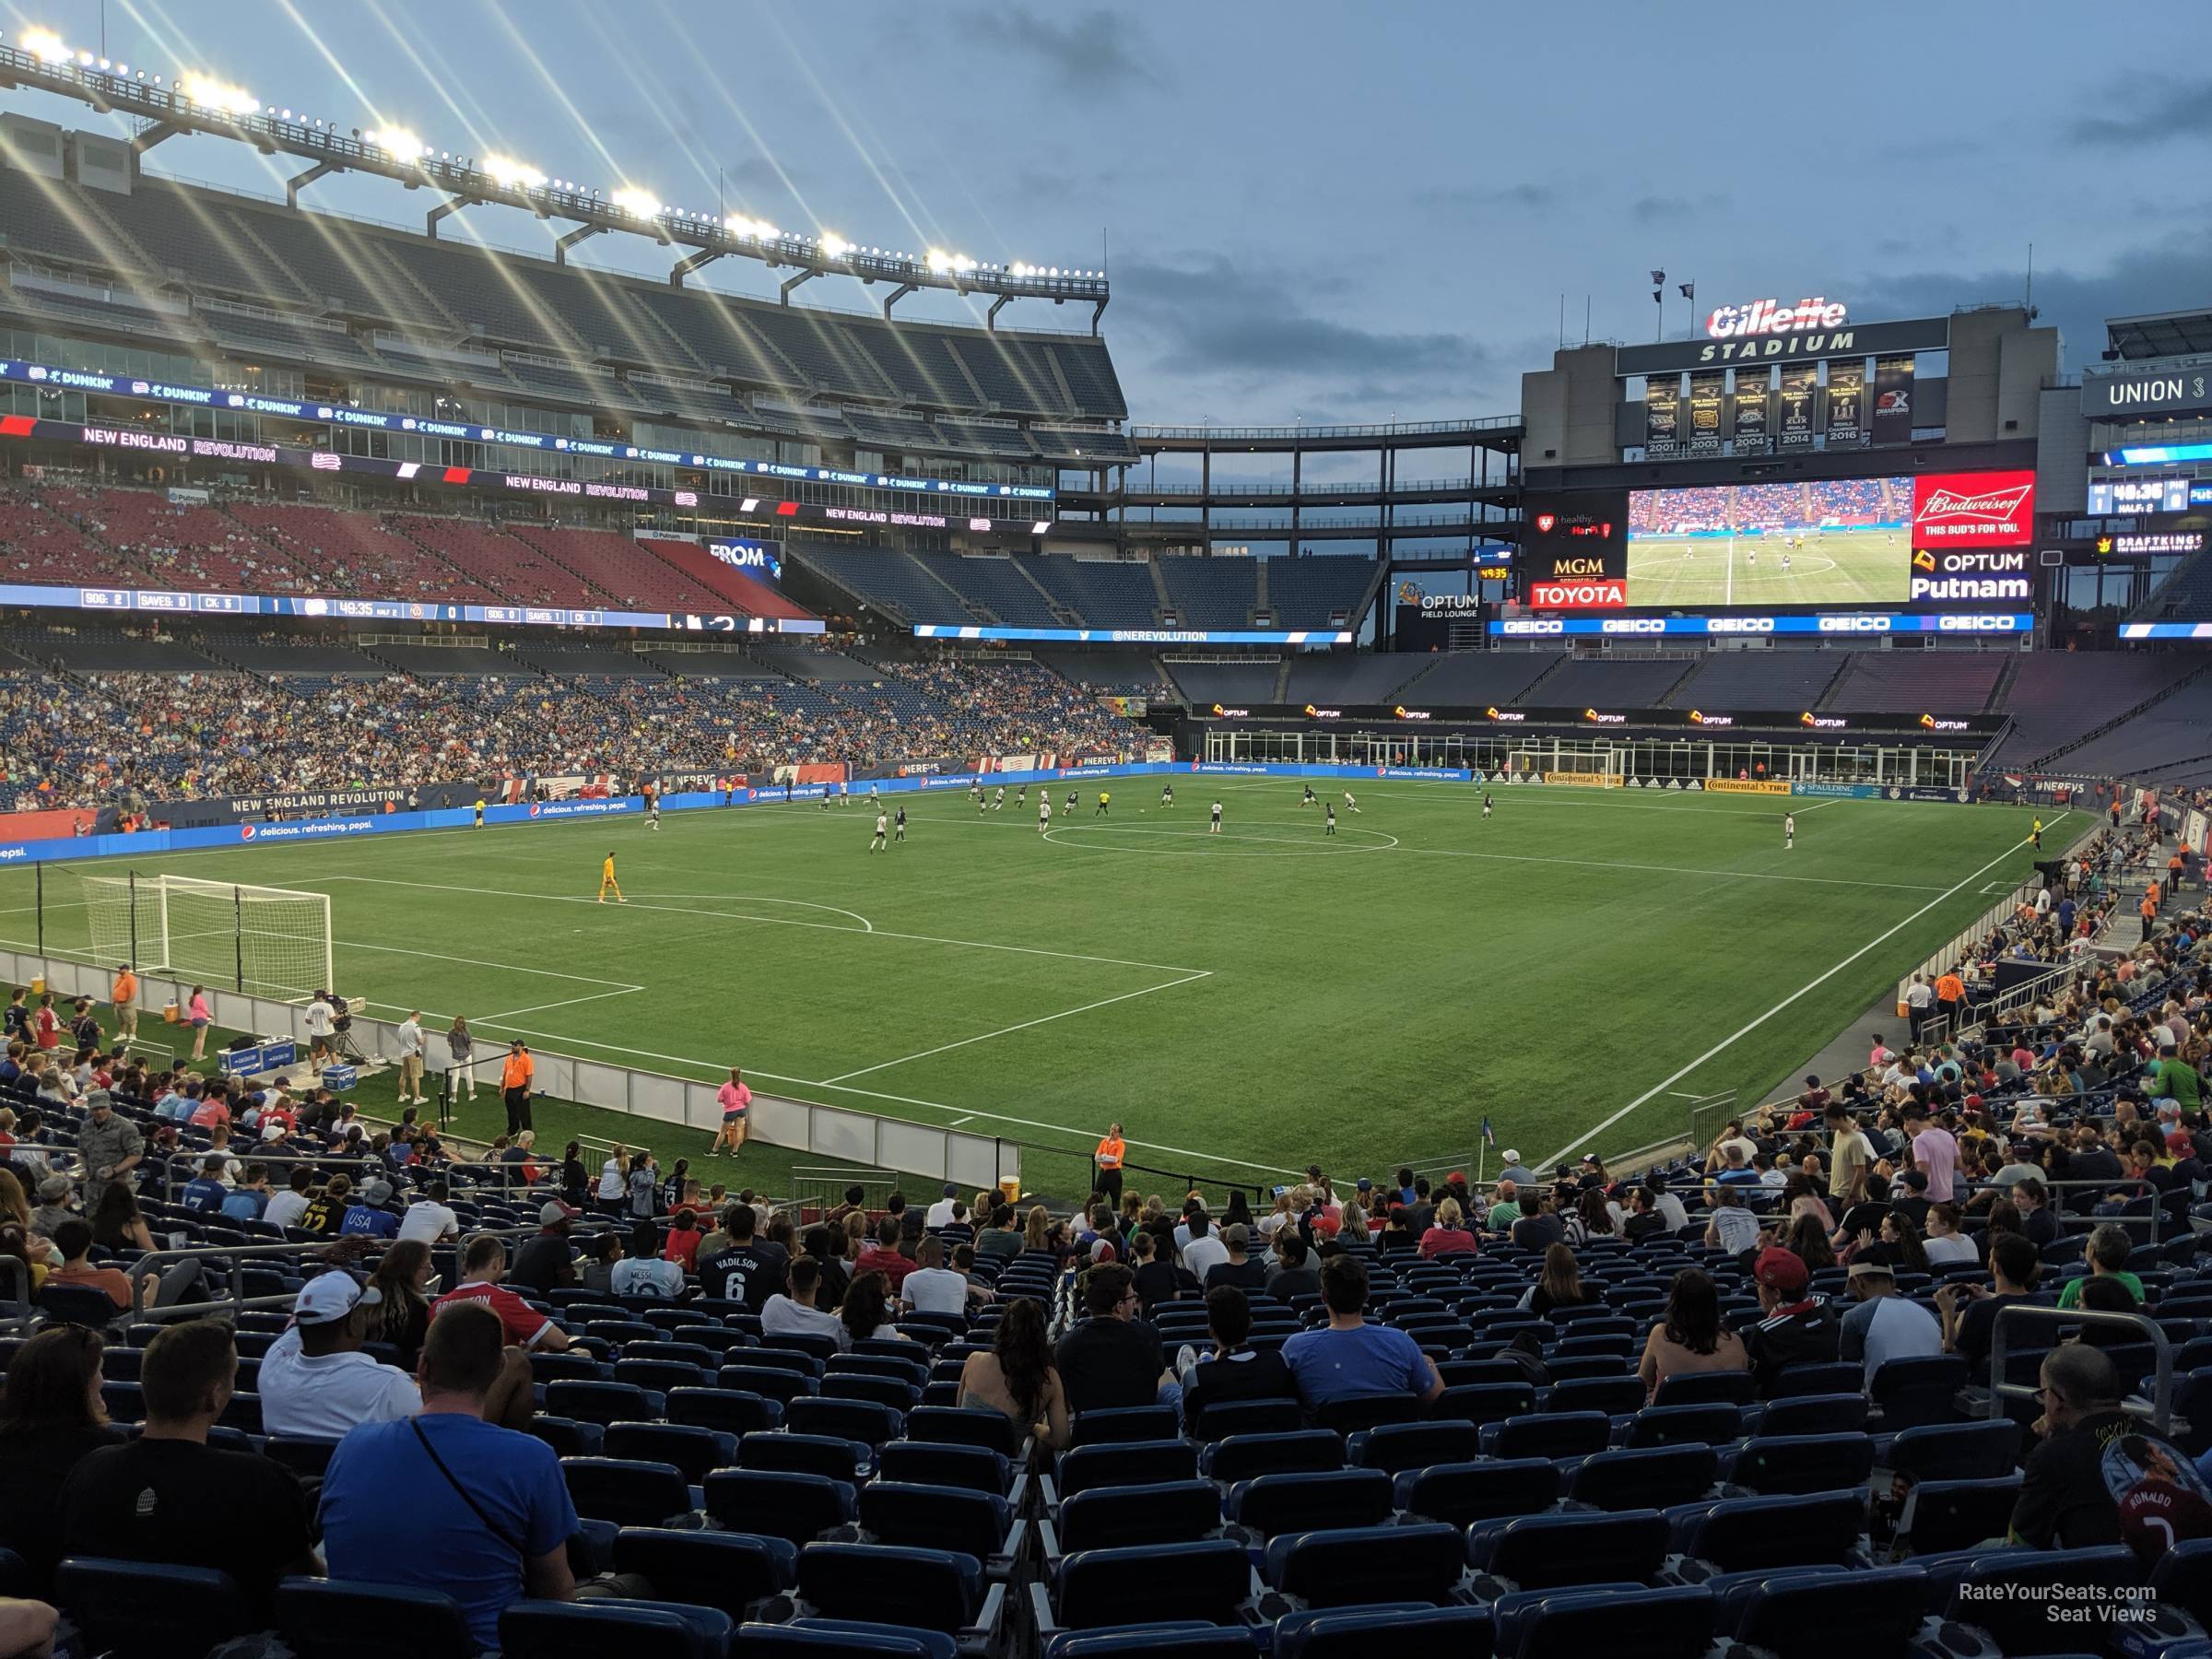 section 139, row 25 seat view  for soccer - gillette stadium